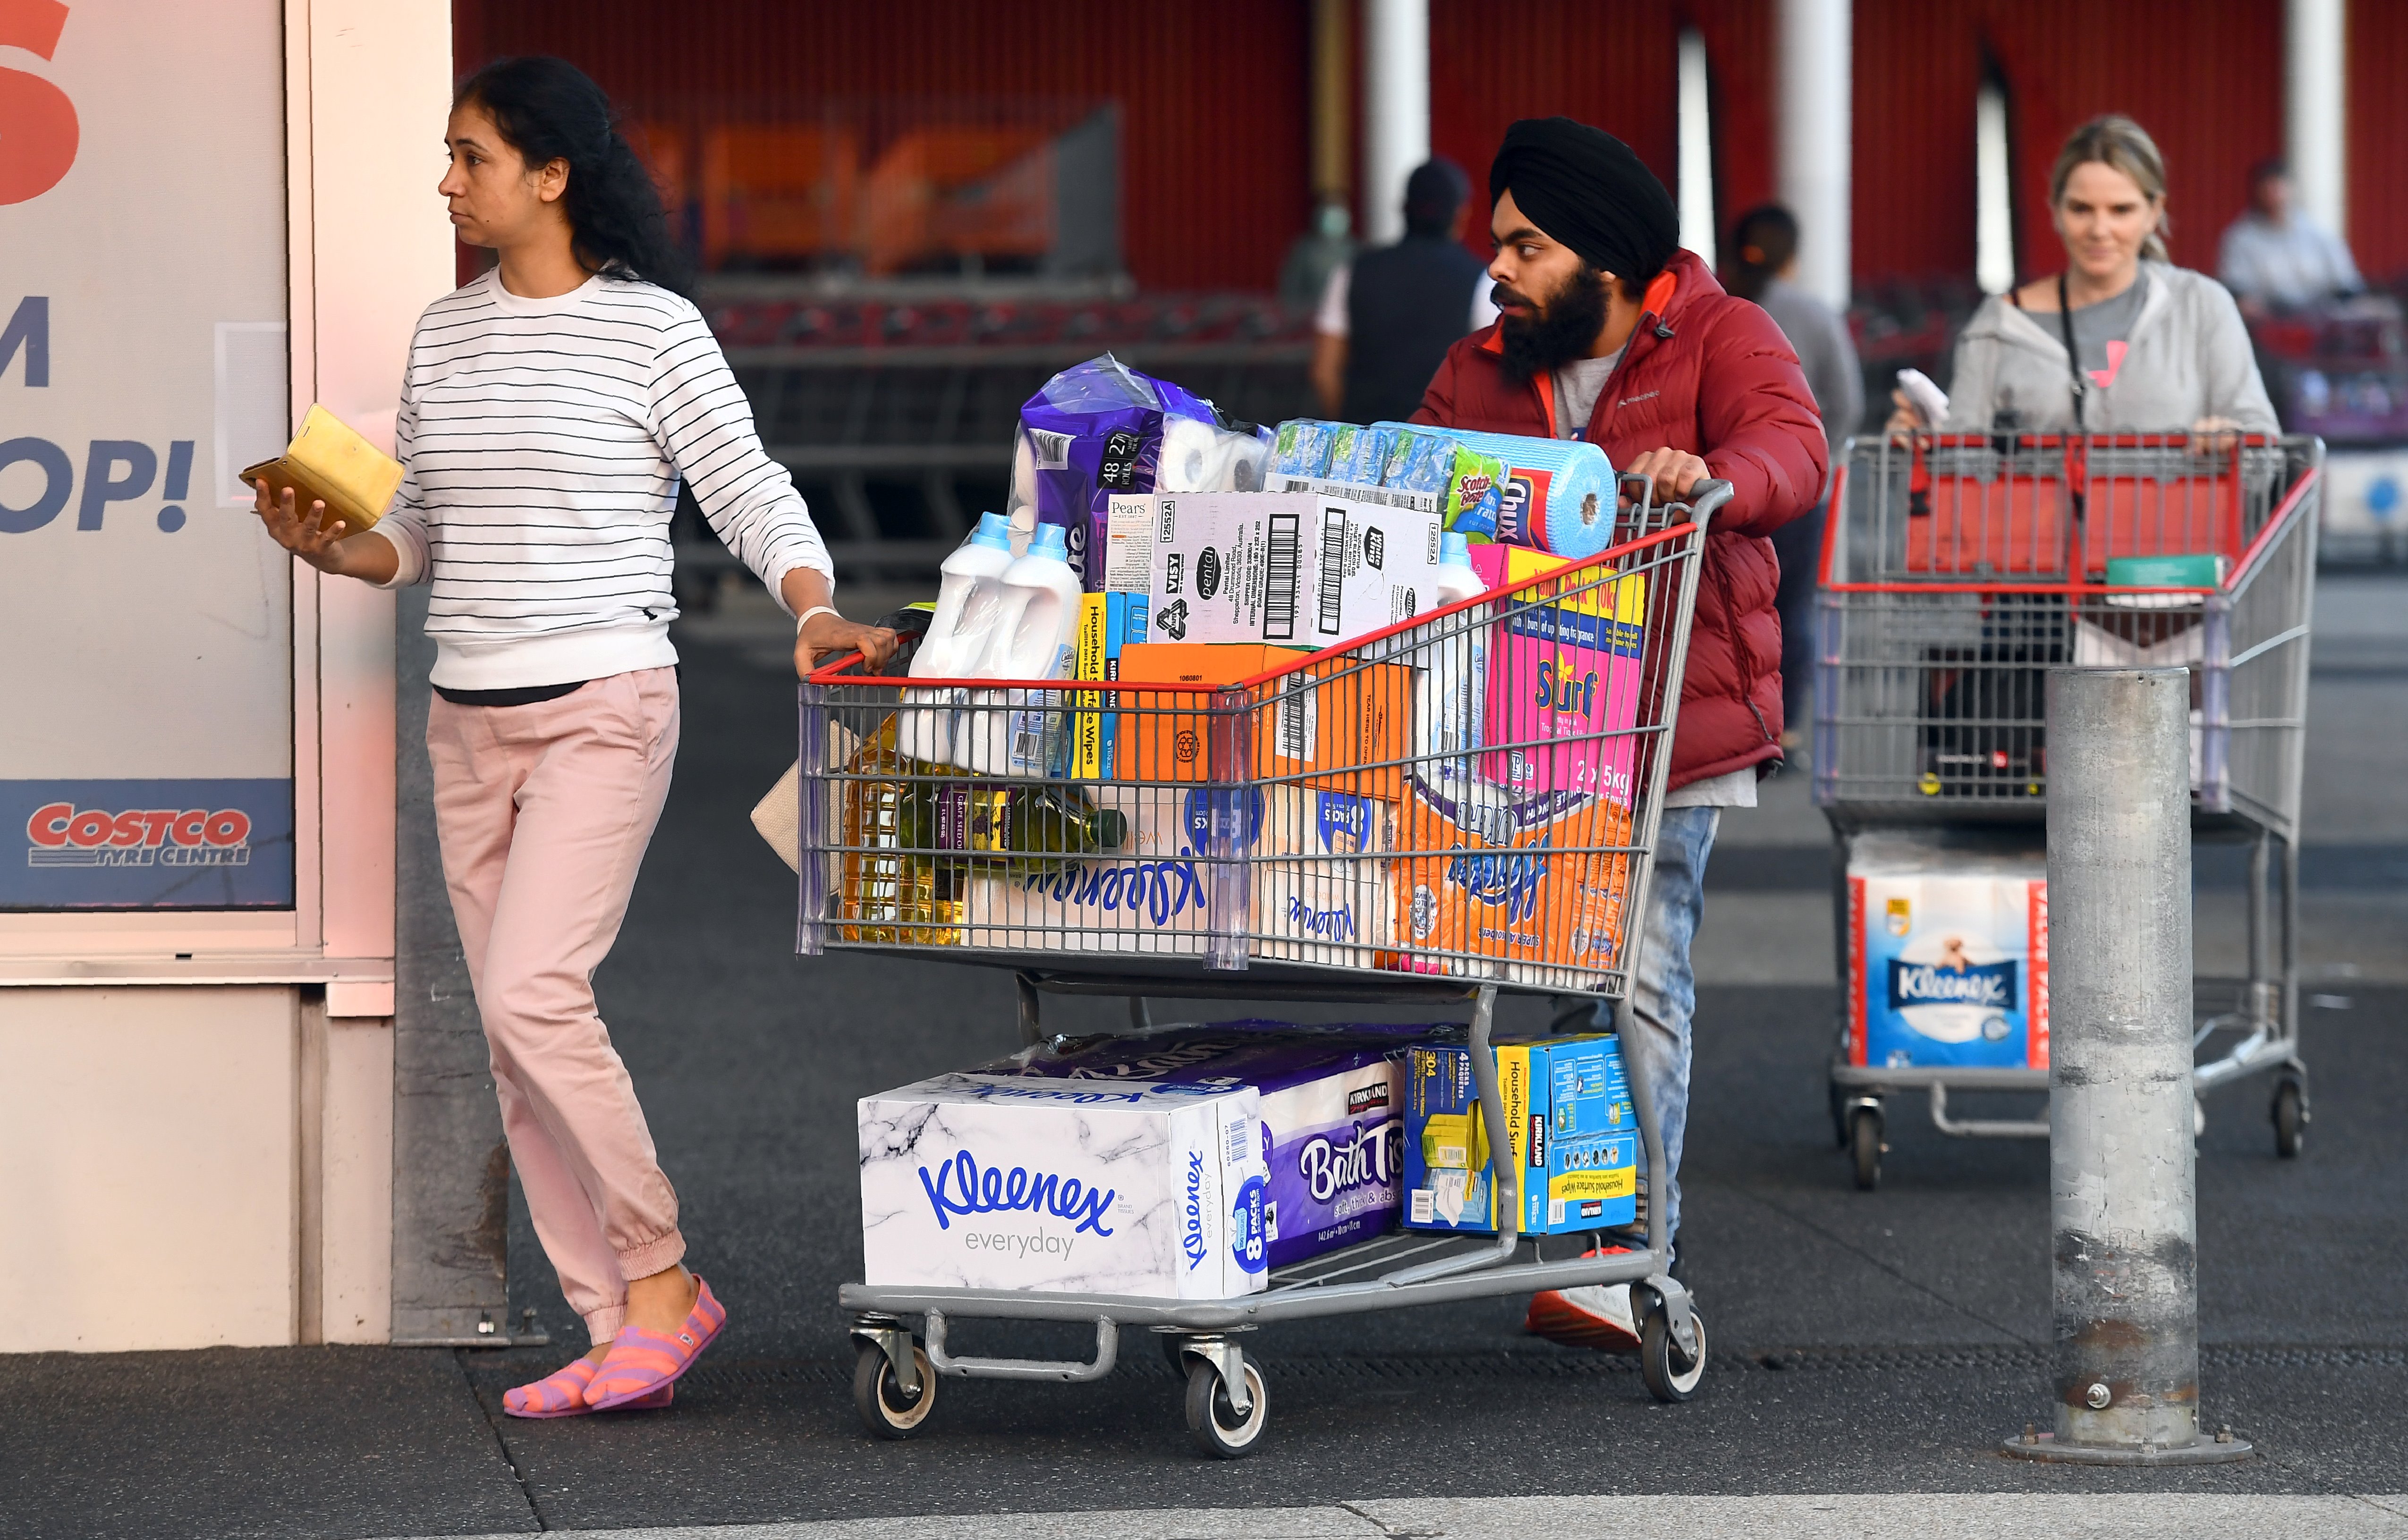 People leave a Costco outlet with a trolley full of toilet paper and cleaning products as fears of a second wave of COVID-19 have sparked a rush on some supermarket items in Melbourne on June 24, 2020. - Major supermarkets in the state of Victoria have reimposed buying limits on toilet paper and other essentials after a renewed escalation in demand sparked fears of a return to scenes of panic-buying seen early in the pandemic. (Photo by William WEST / AFP)